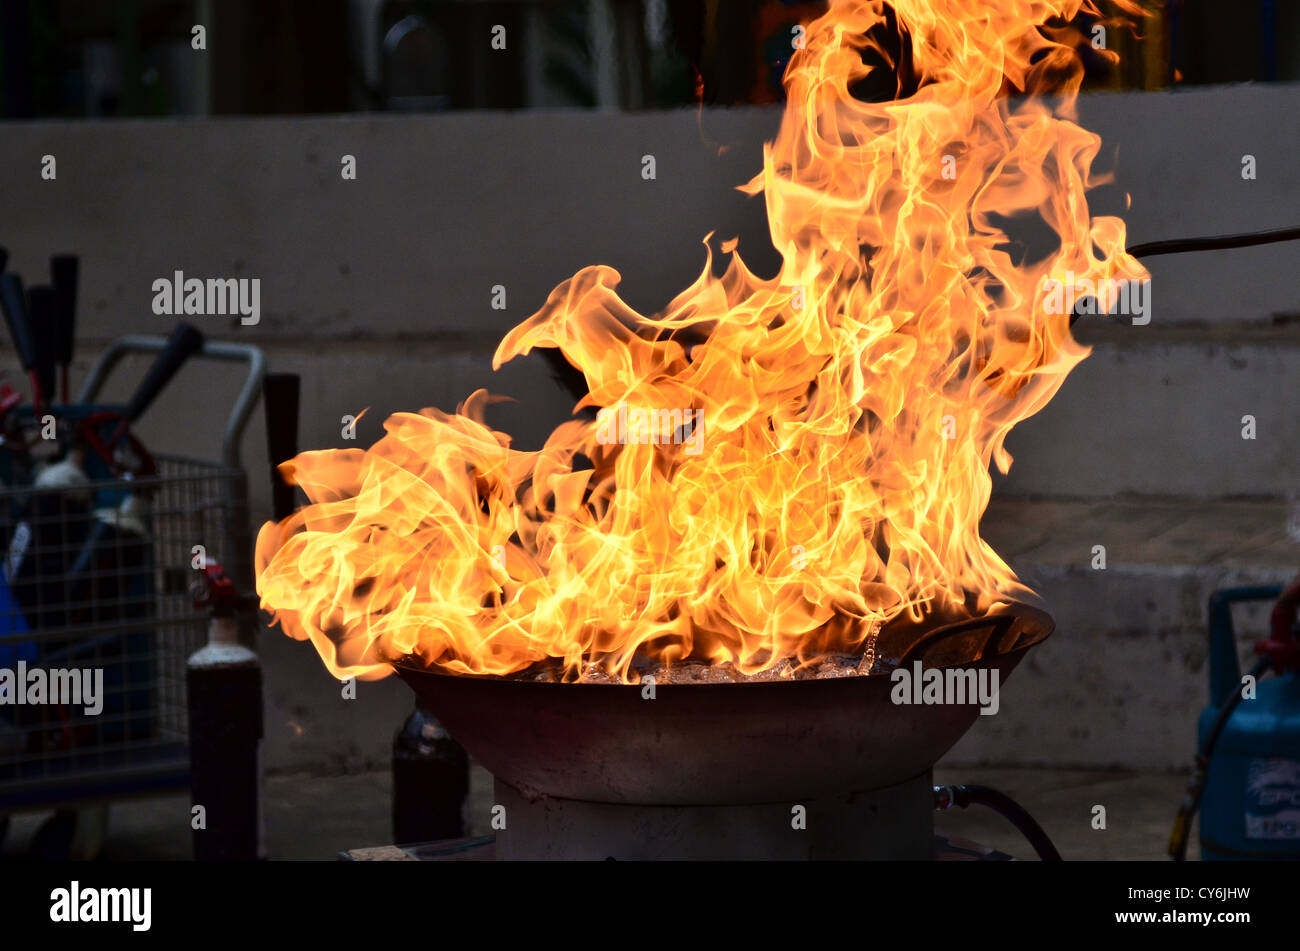 fire burning fiercely and hot Stock Photo